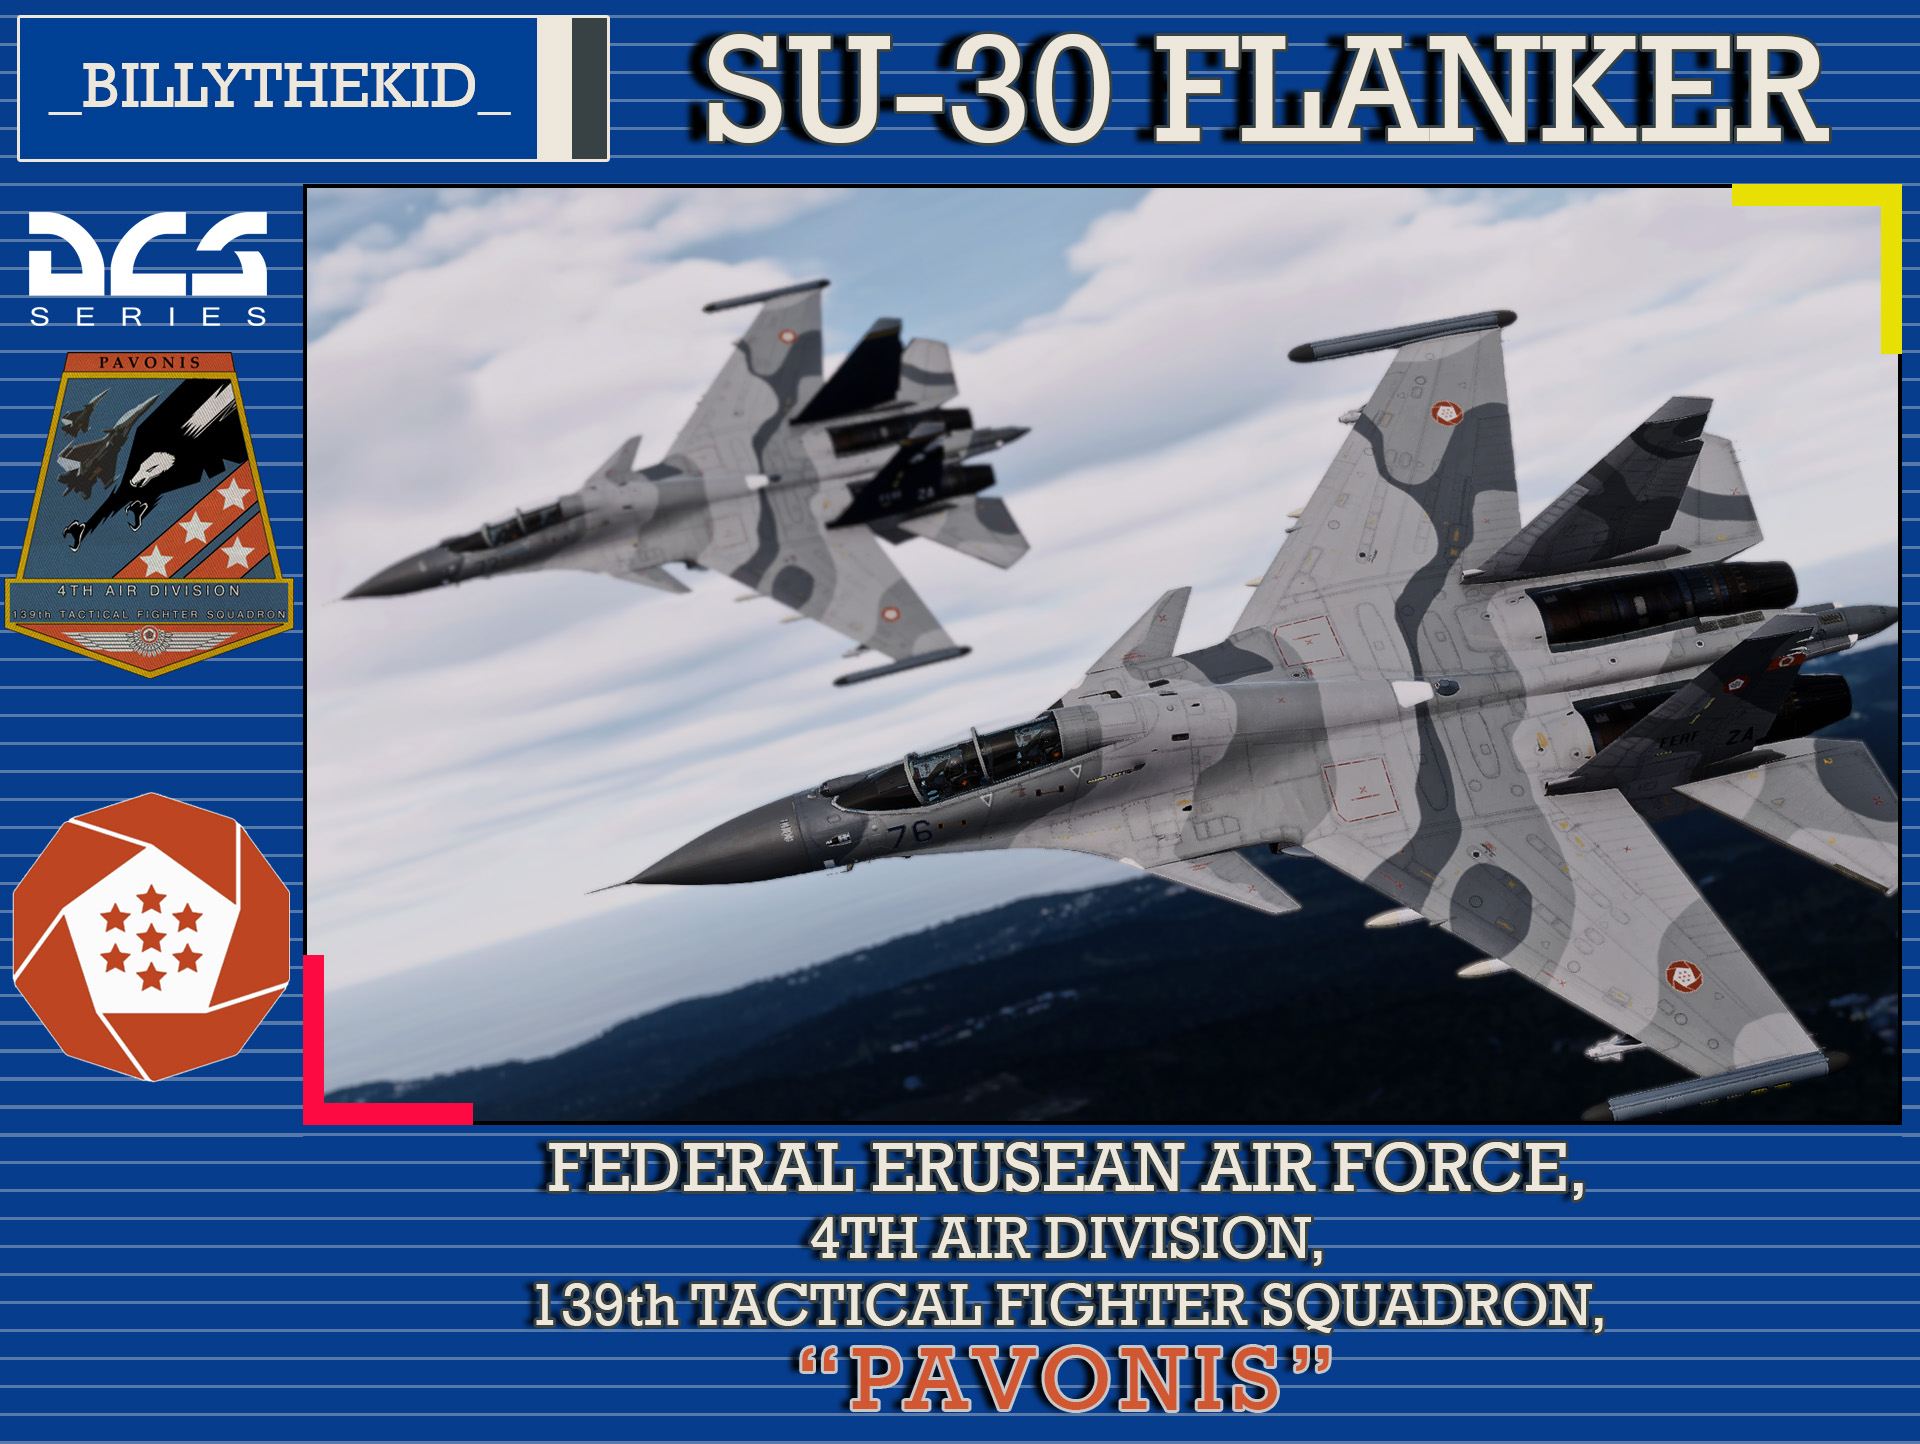 Ace Combat - Federal Erusean Air Force - 4th Air Division - 139th Tactical Fighter Squadron "Pavonis" SU-30 Flanker